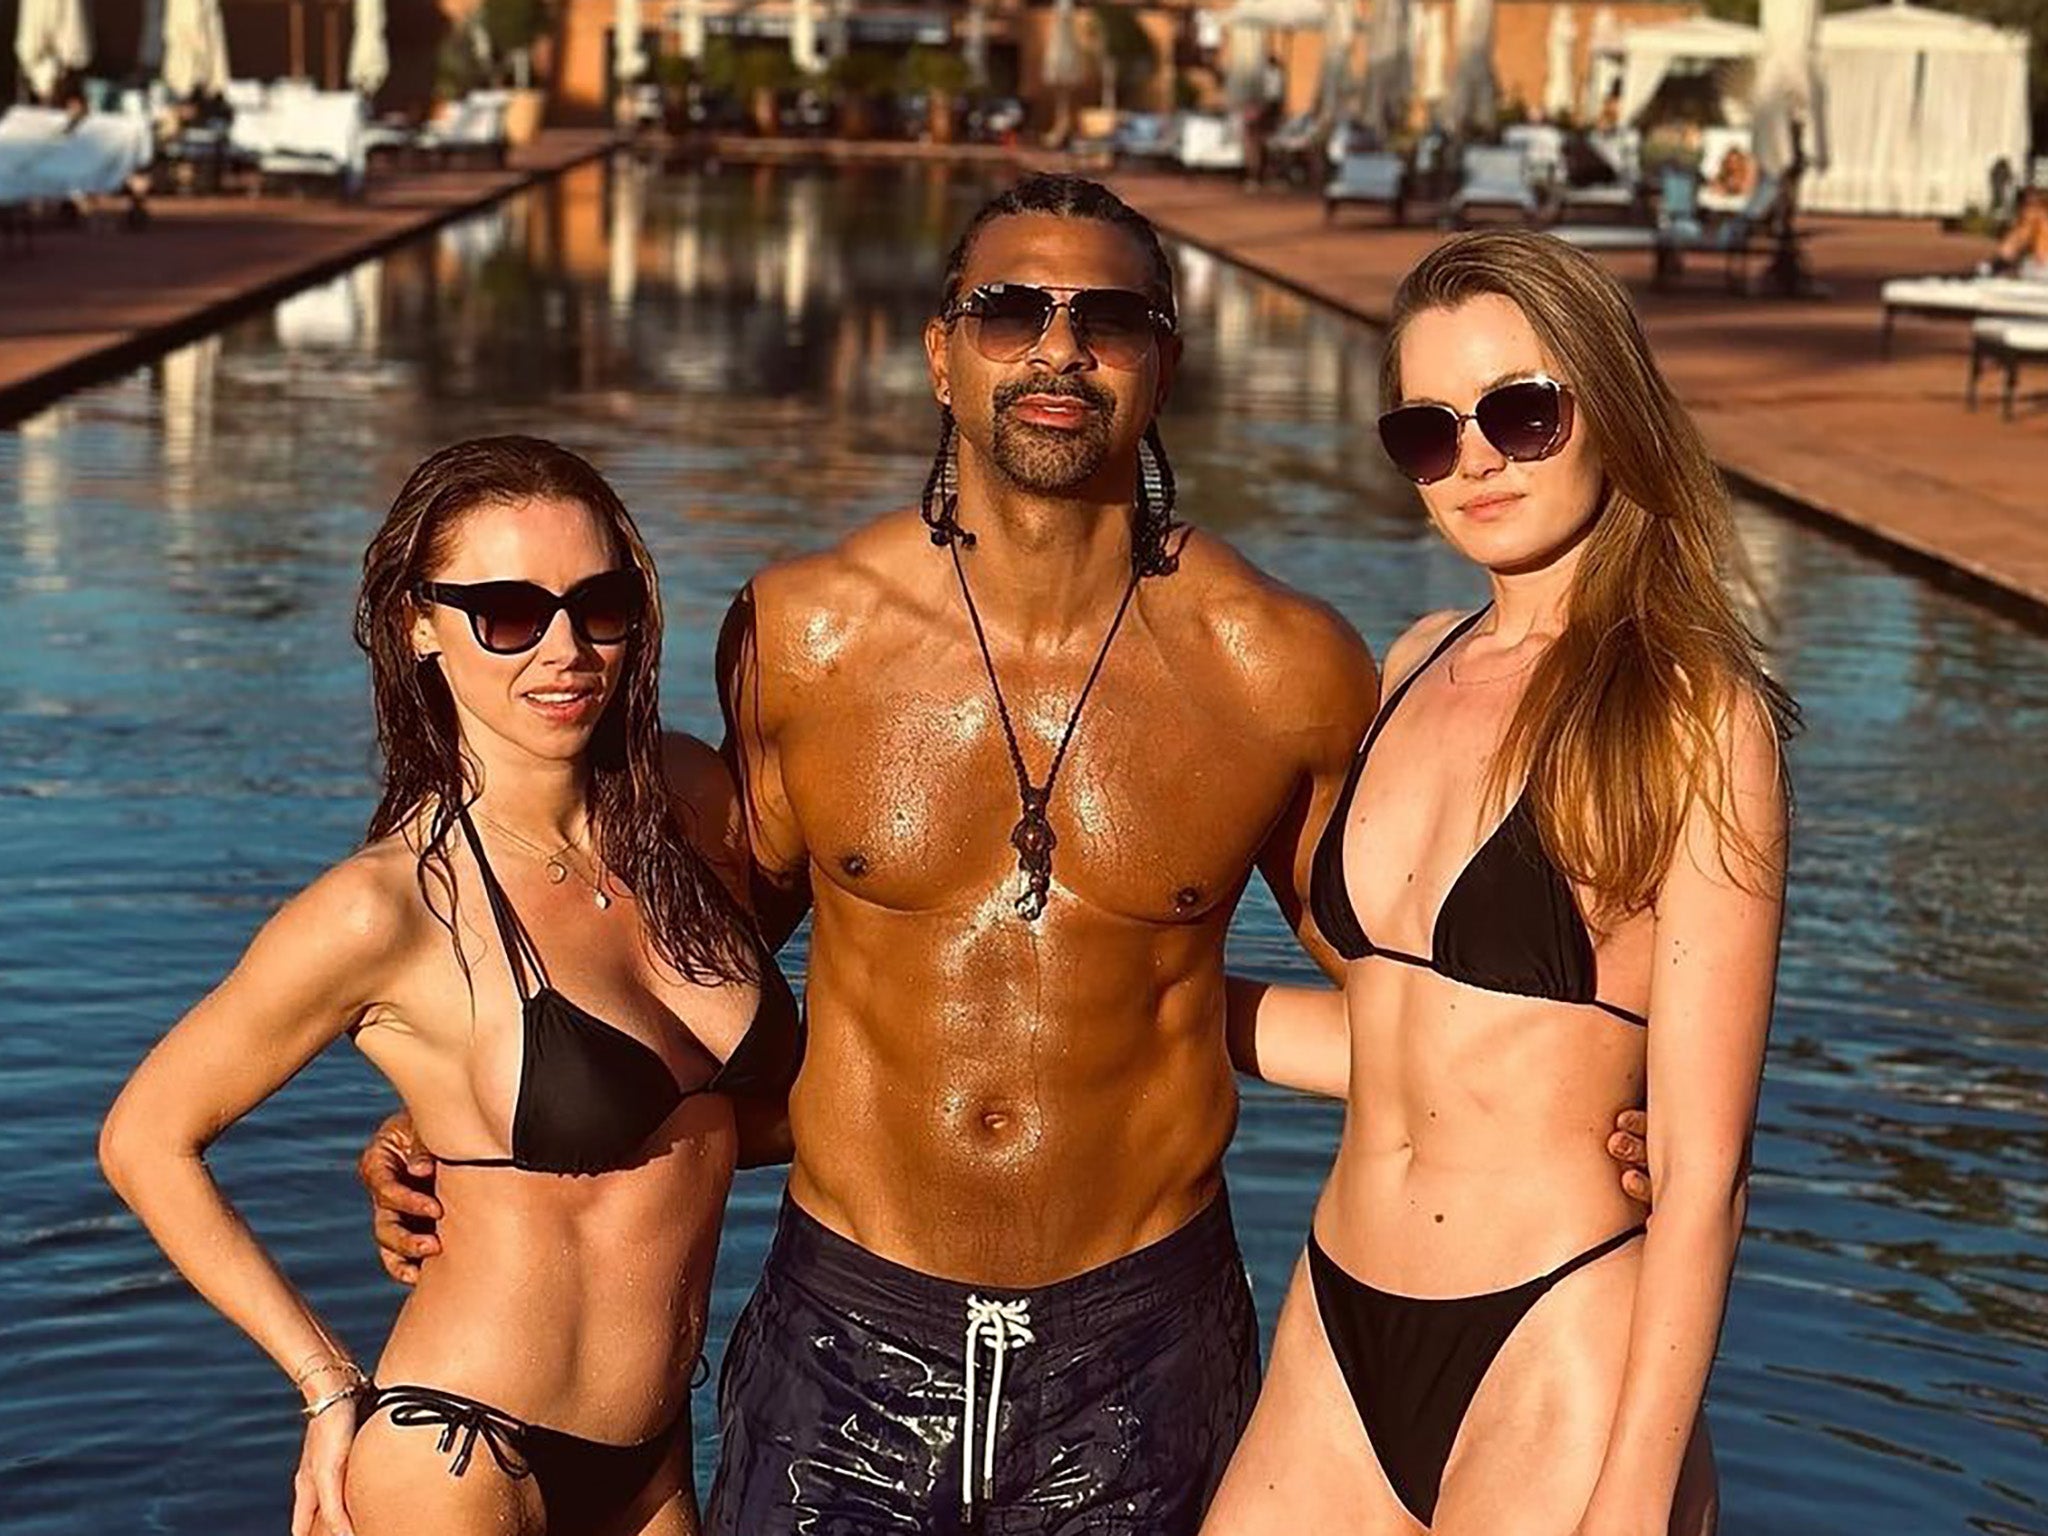 David Haye, Una Healy and Sian Osborne Can throuples or triad relationships really work? The Independent